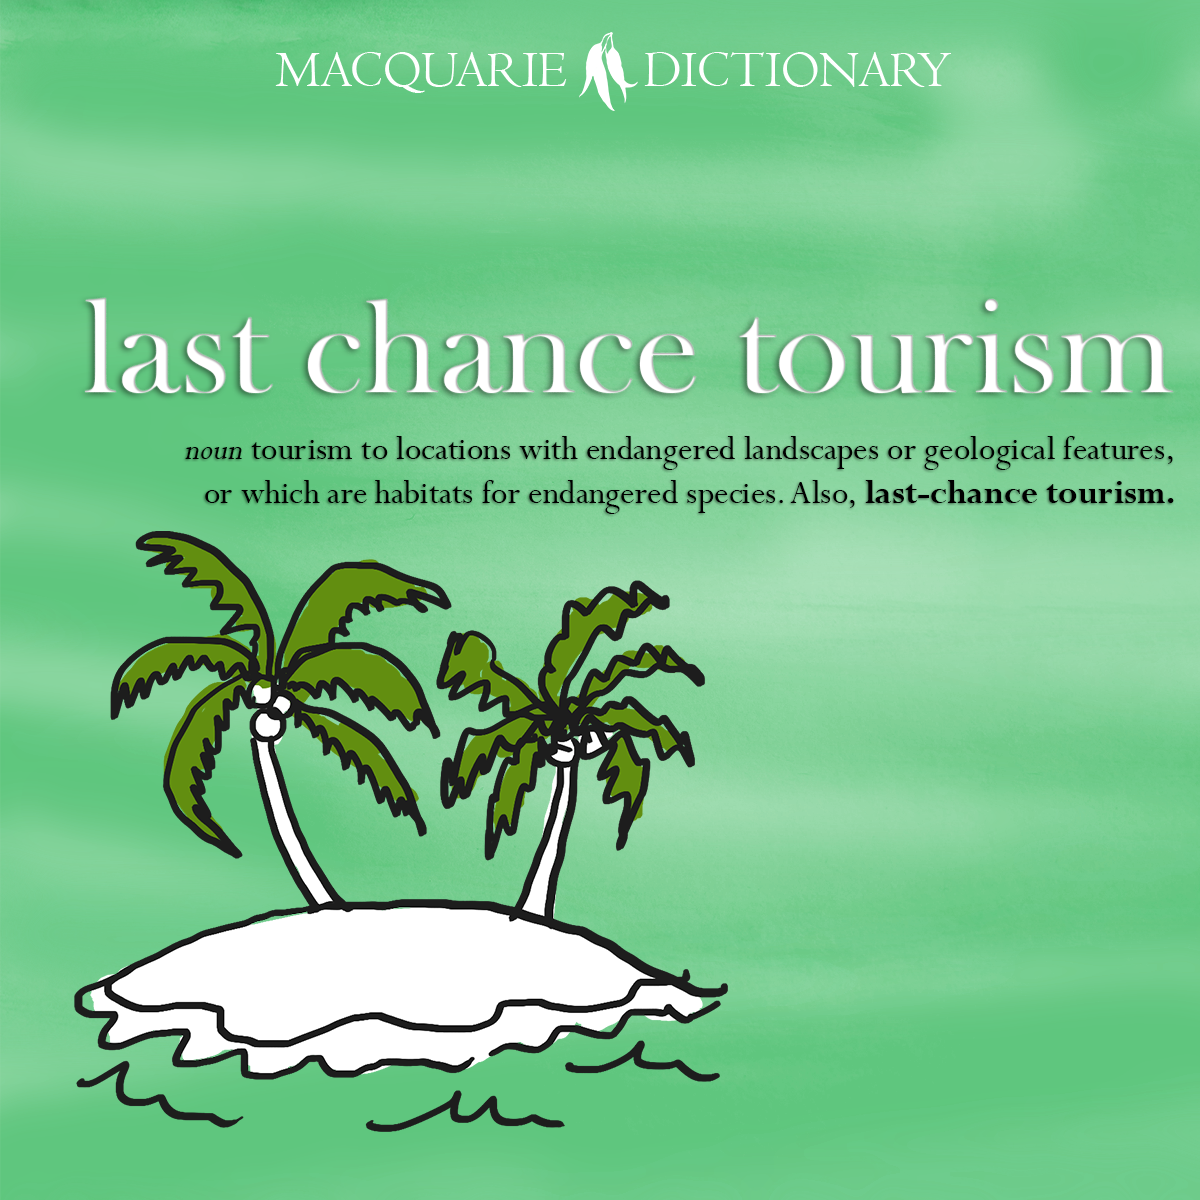 Word of the Year 2021 - last chance tourism